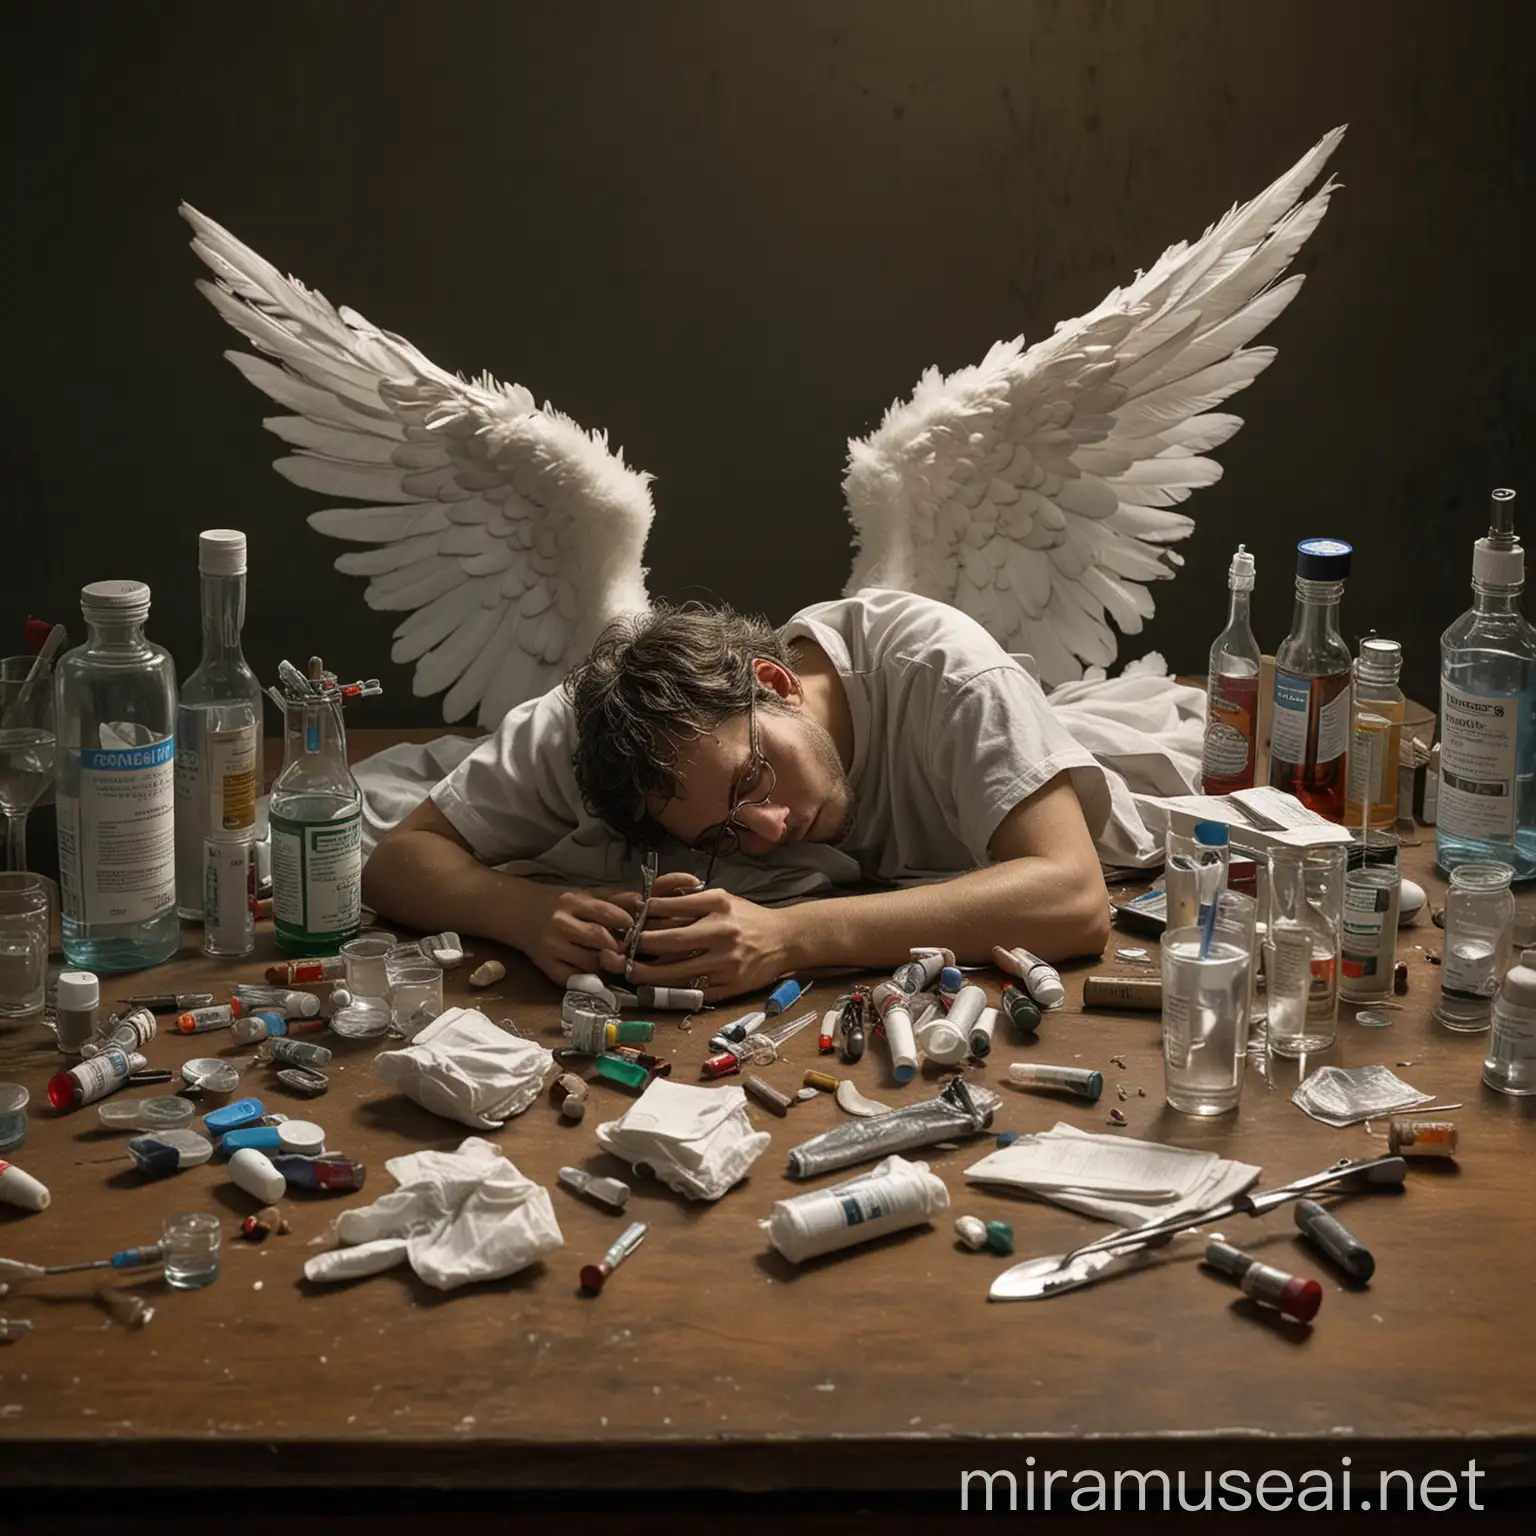 Guardian Angel Resting Angel Sleeping Surrounded by Medical Supplies and Utensils